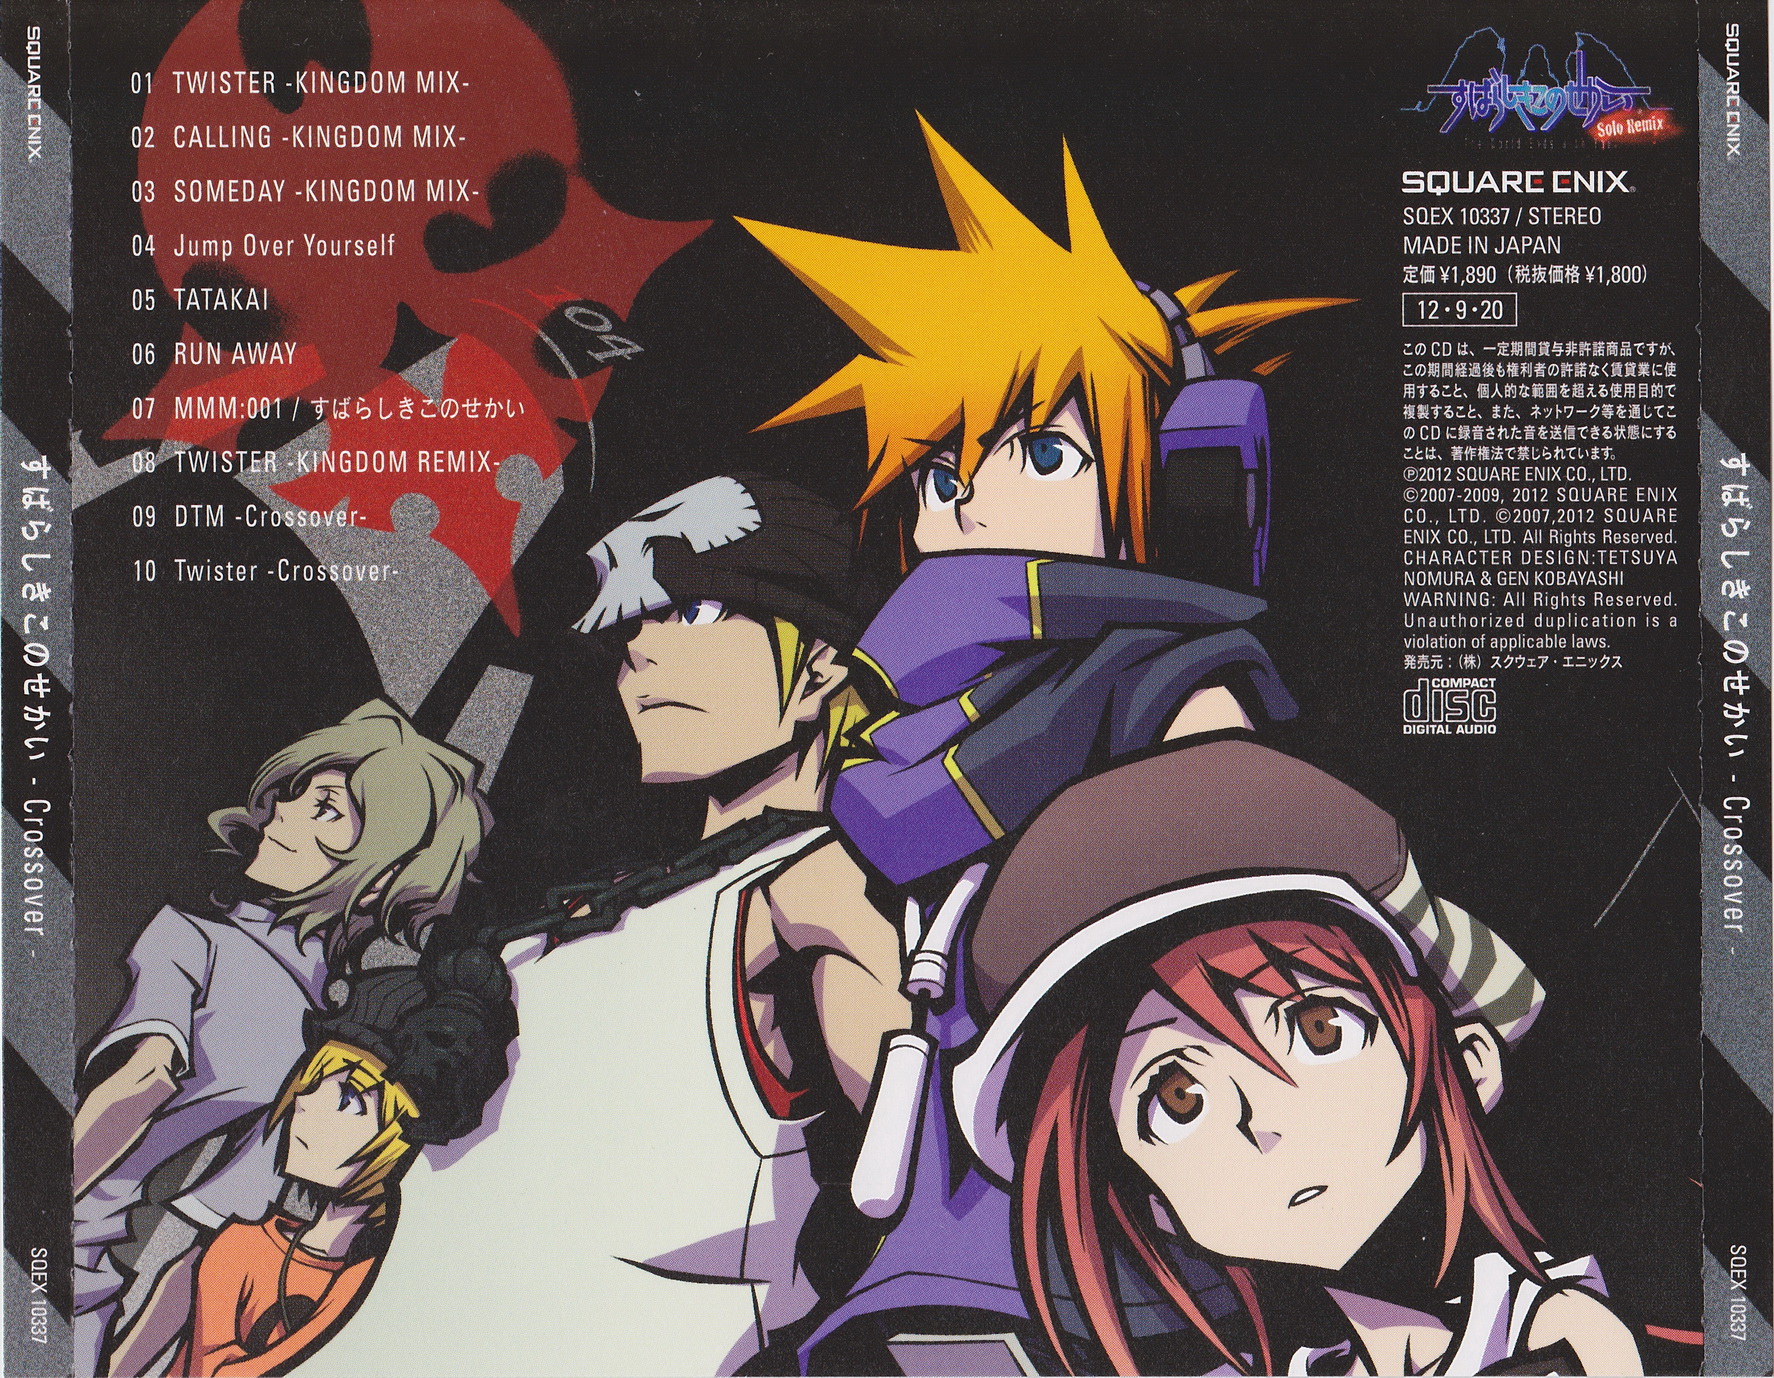 The World Ends With You Crossover Mp3 Download The World Ends With You Crossover Soundtracks For Free